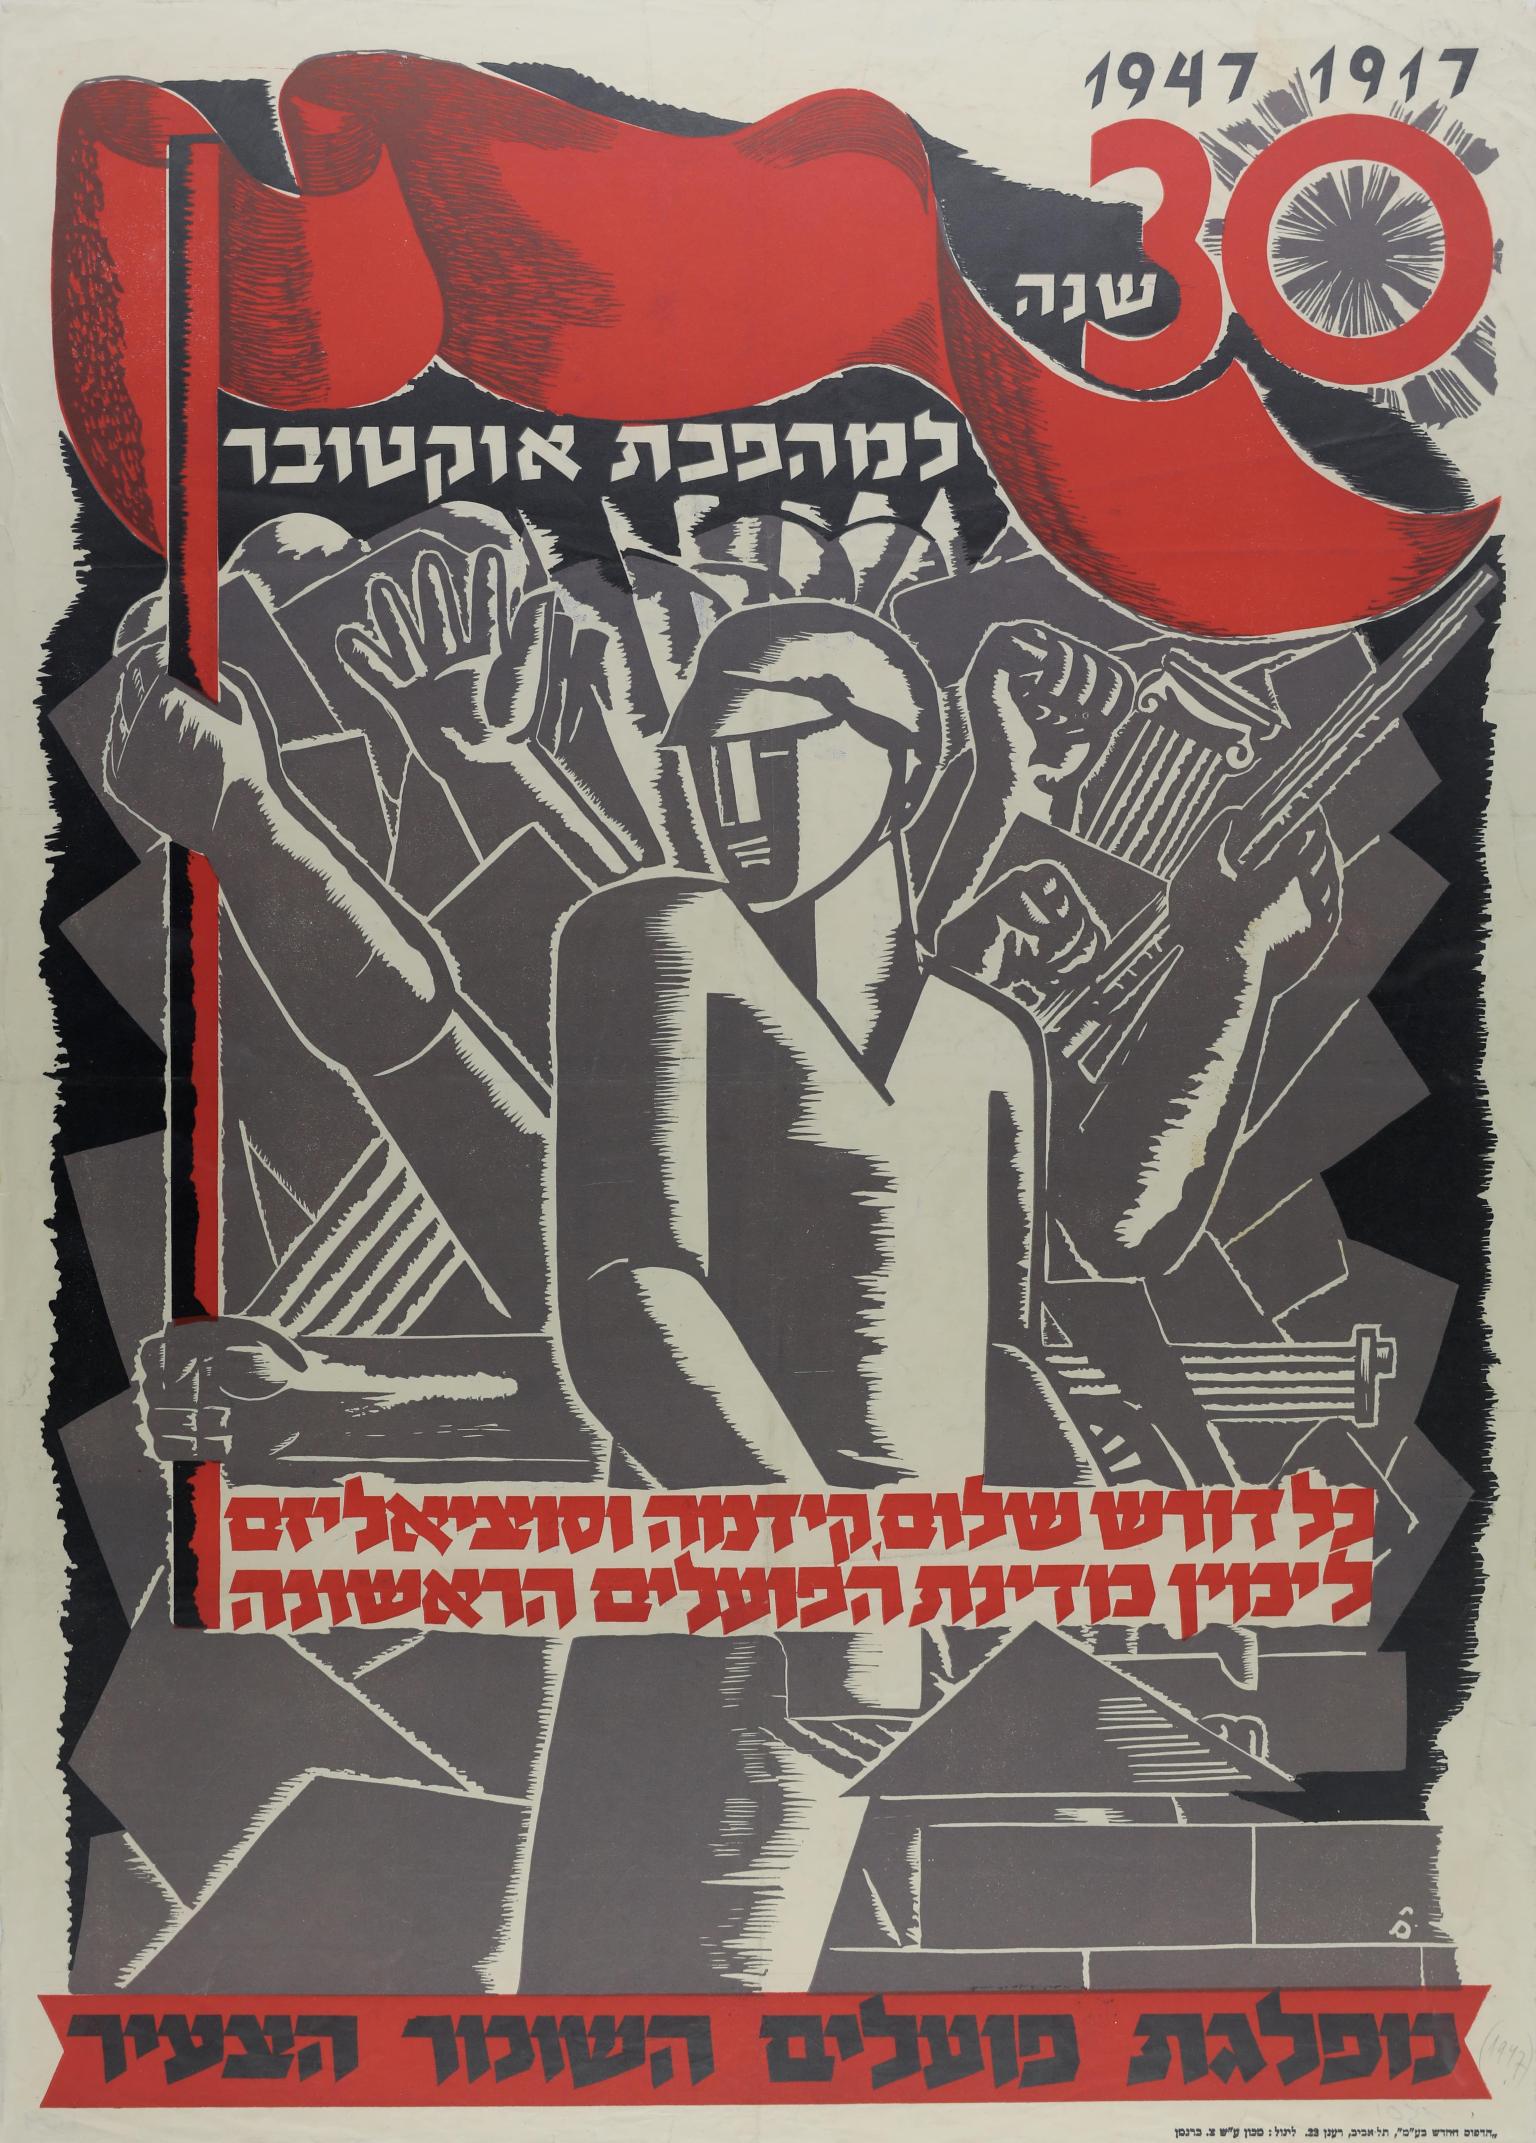 Printed poster with Hebrew text on top and bottom, featuring a central figure with clenched fists and weapons protruding from behind. Two fists are waving a large flag with the number 30 on it above the central figure's head.